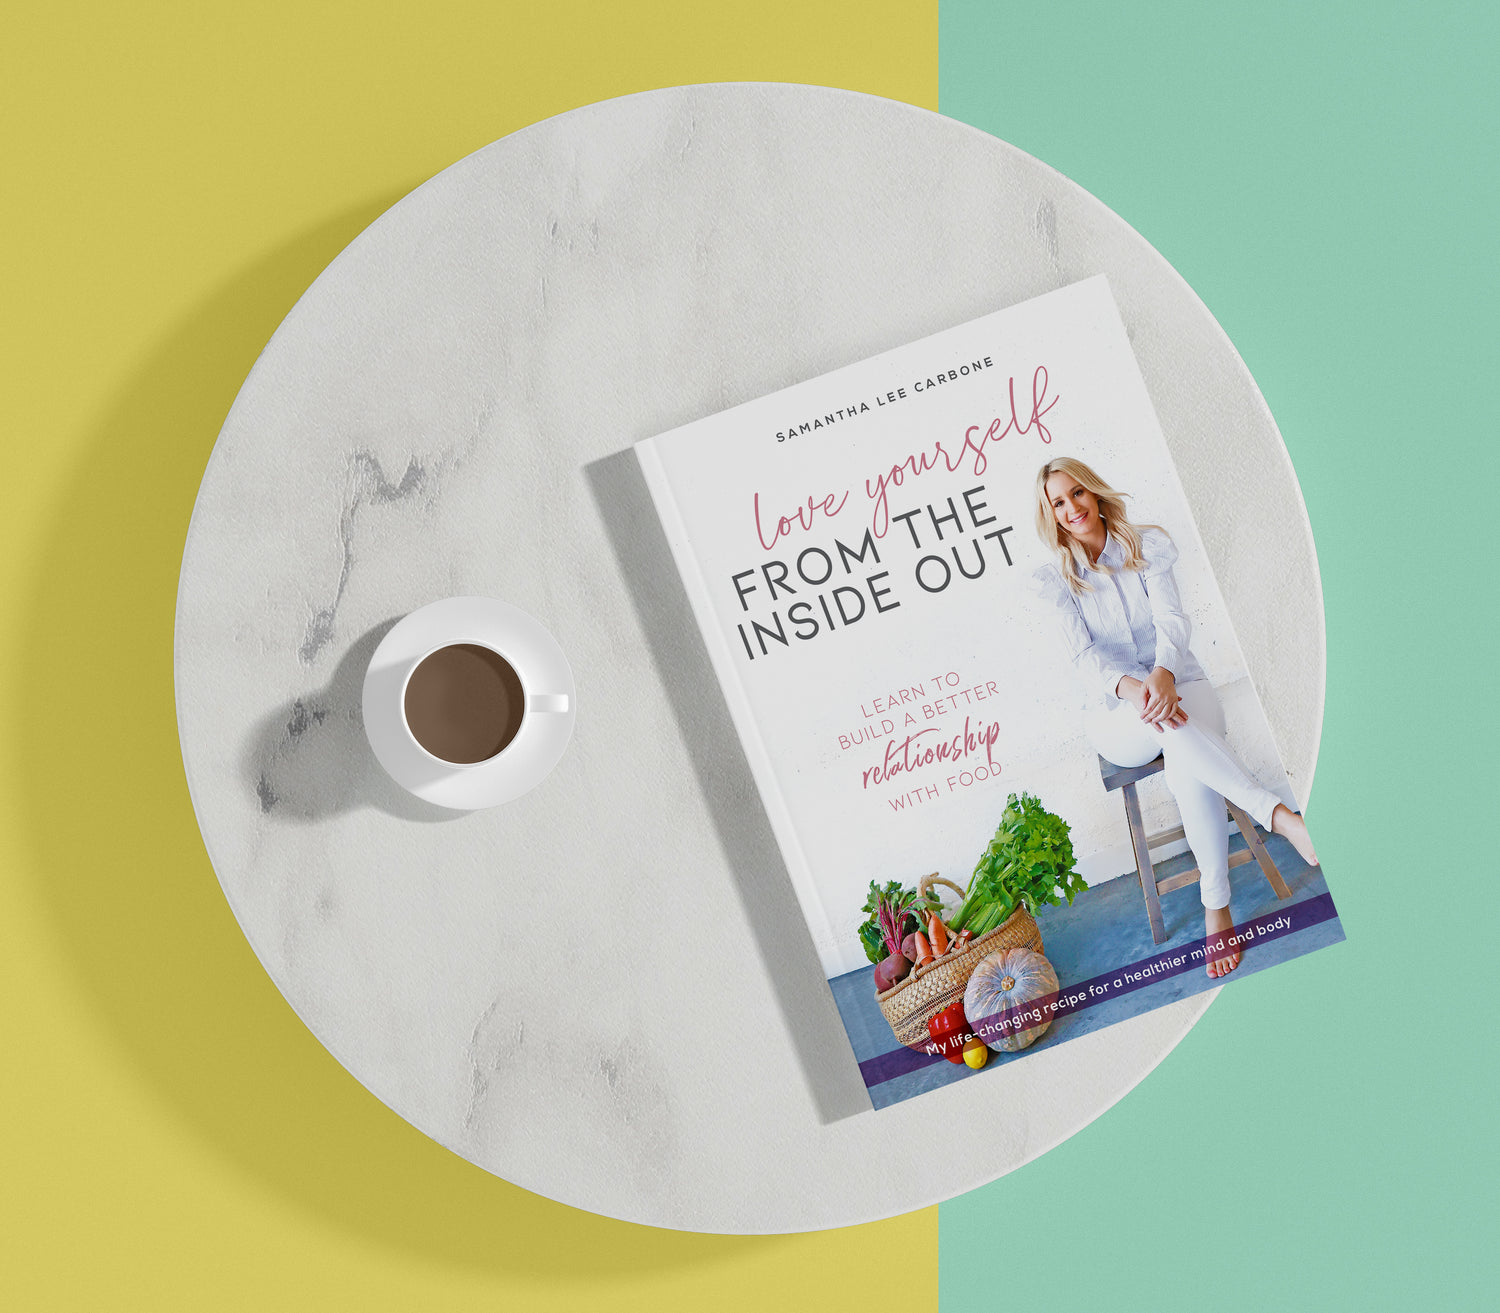 book, recipebook, samantha lee carbone, love yourself from the inside out, granola, lets health granola, samantha lee granola, healthy granola